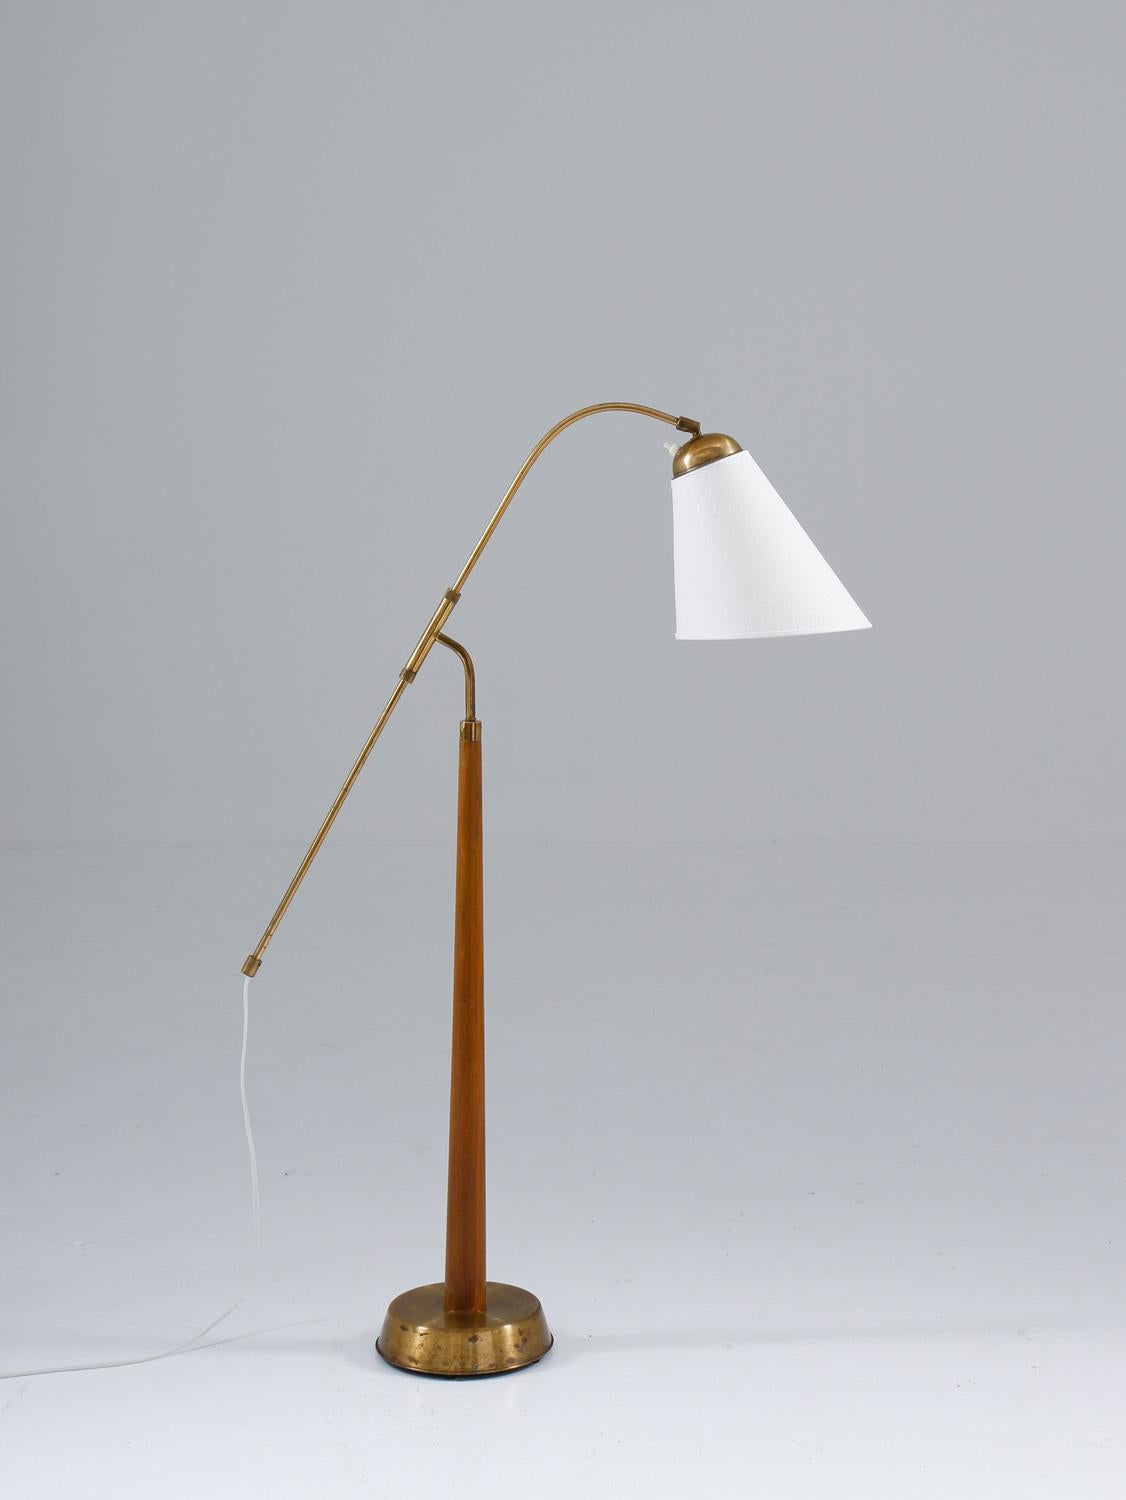 Very rare floor lamp model 512/1 in brass and wood by Ystad Metall, Sweden.
This is one of the few lamps produced by Ystad Metall. The lamp consists of a brass and wooden base, supporting a brass rod that is adjustable in height. 

Maximum height